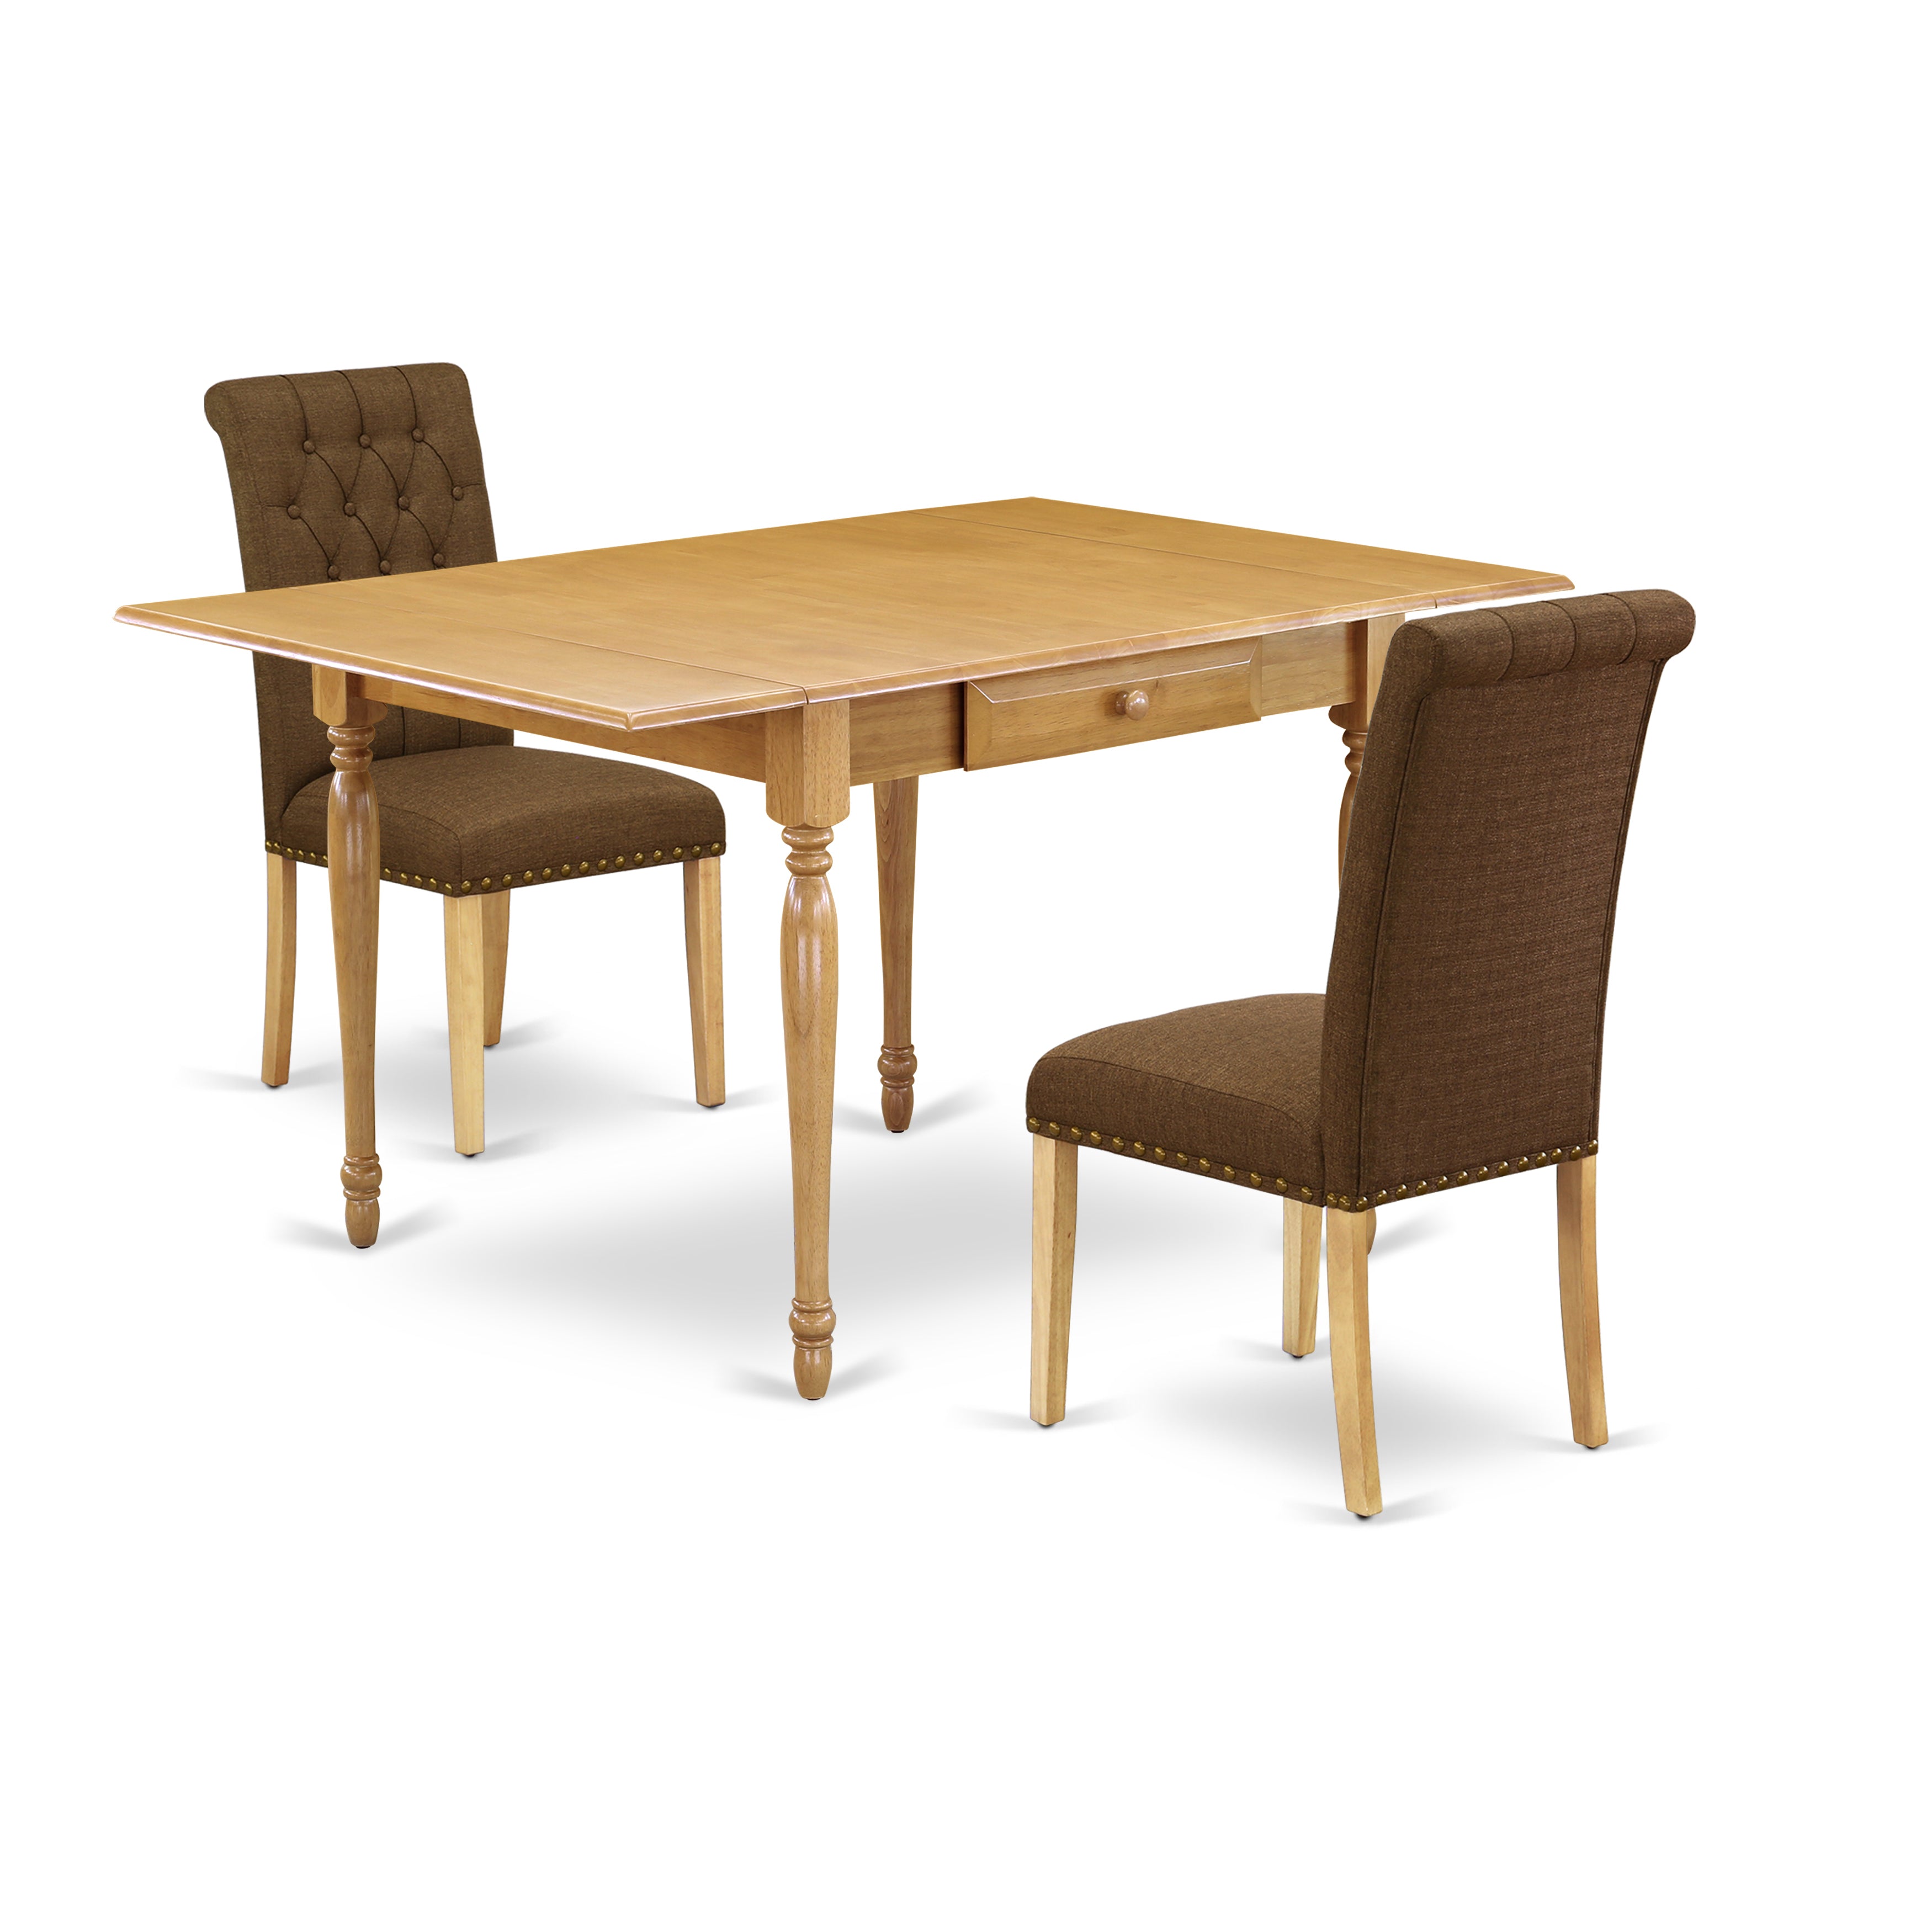 East West Furniture MZBR3-OAK-18 3Pc Dining Table Set for 2 Contains a Rectangle Table and 2 Parson Dining Chairs with Dark Coffee Color Linen Fabric, Drop Leaf Table with Full Back Chairs, Oak Finish